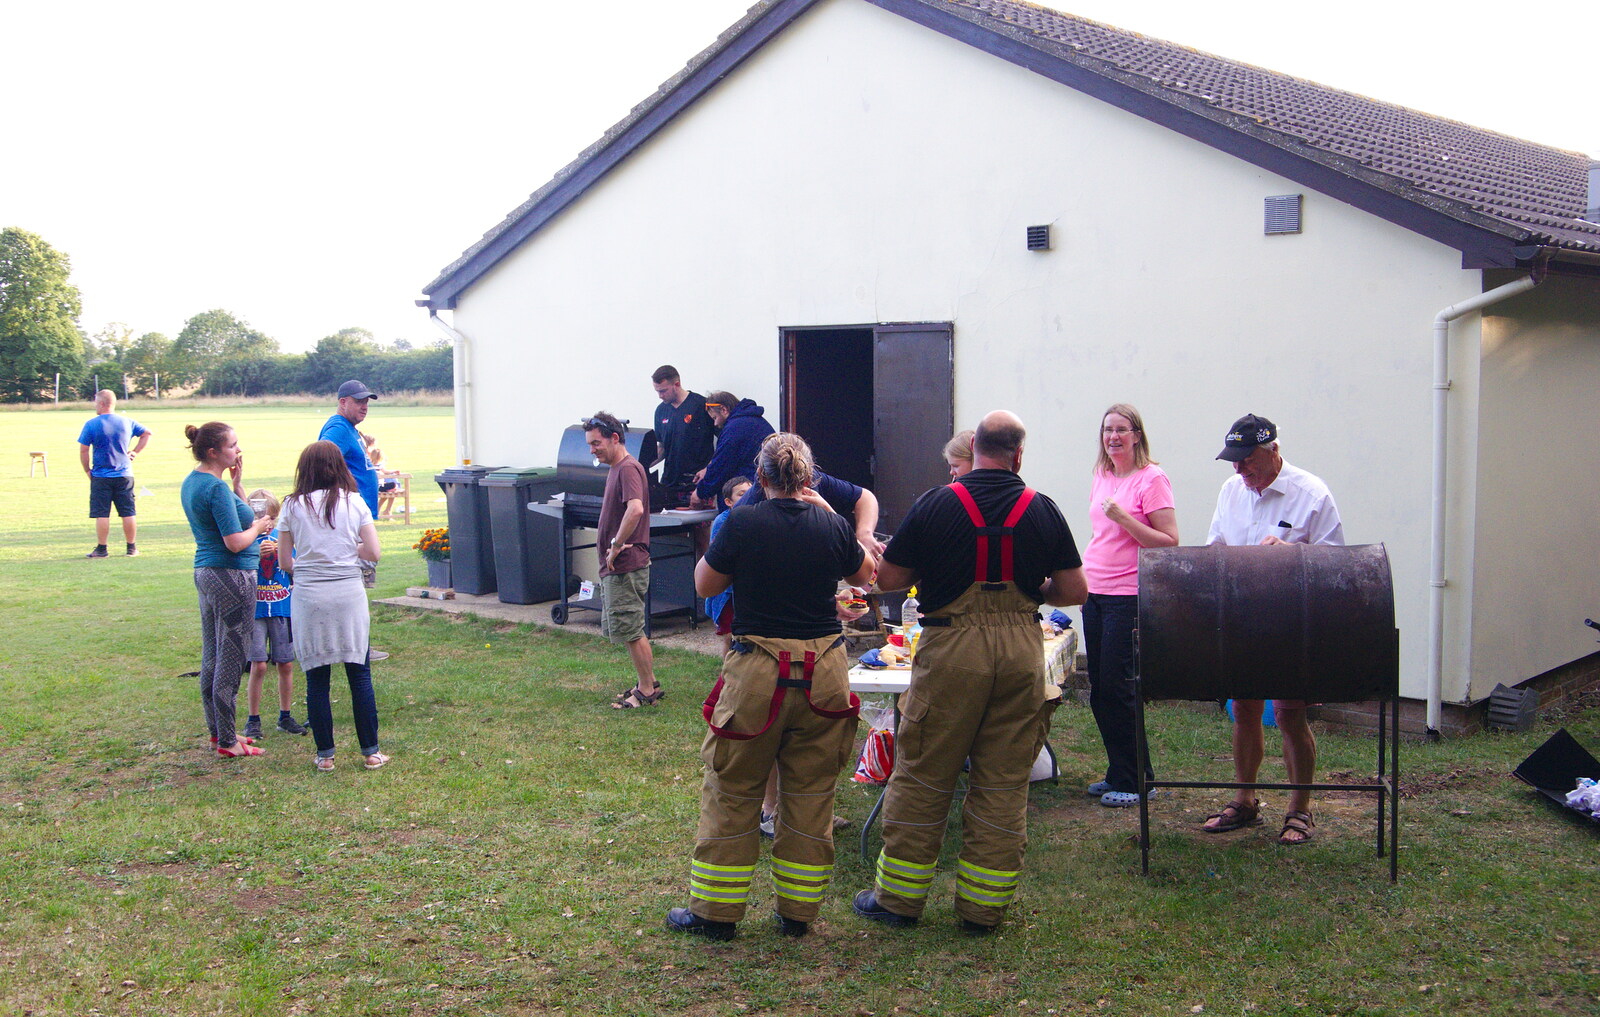 The barbeque continues from A Water Fight with a Fire Engine, Eye Cricket Club, Suffolk - 5th August 2019